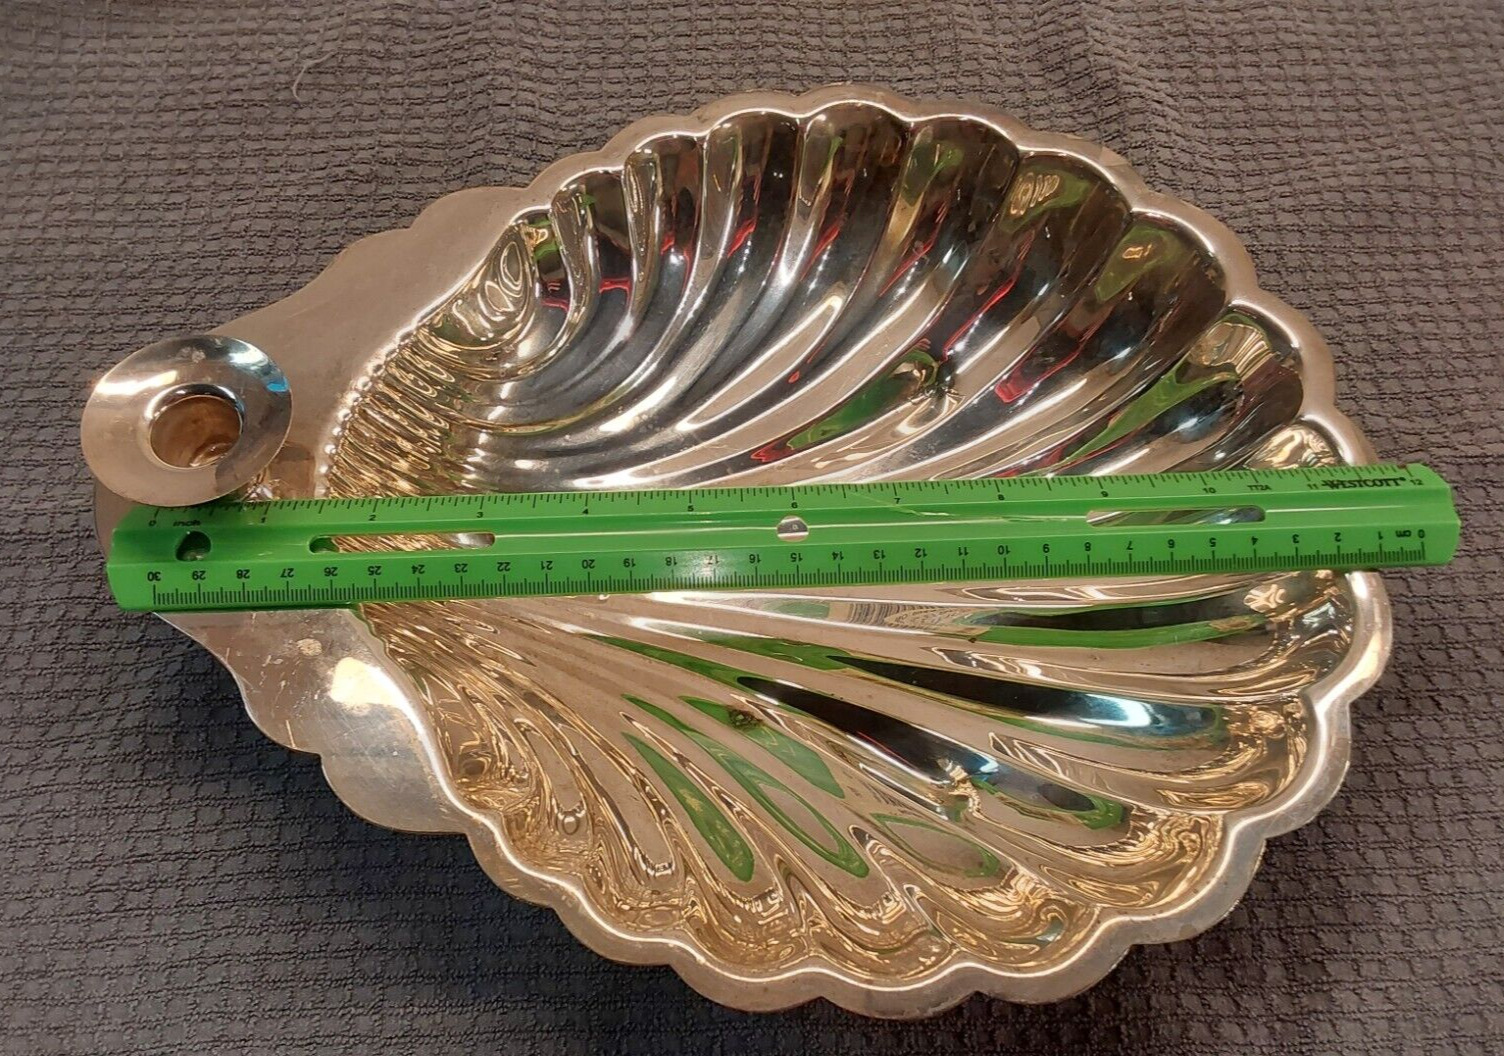 Vintage Silver-Plated Clamshell Dish Candlestick Footed Dish with Candle Holder